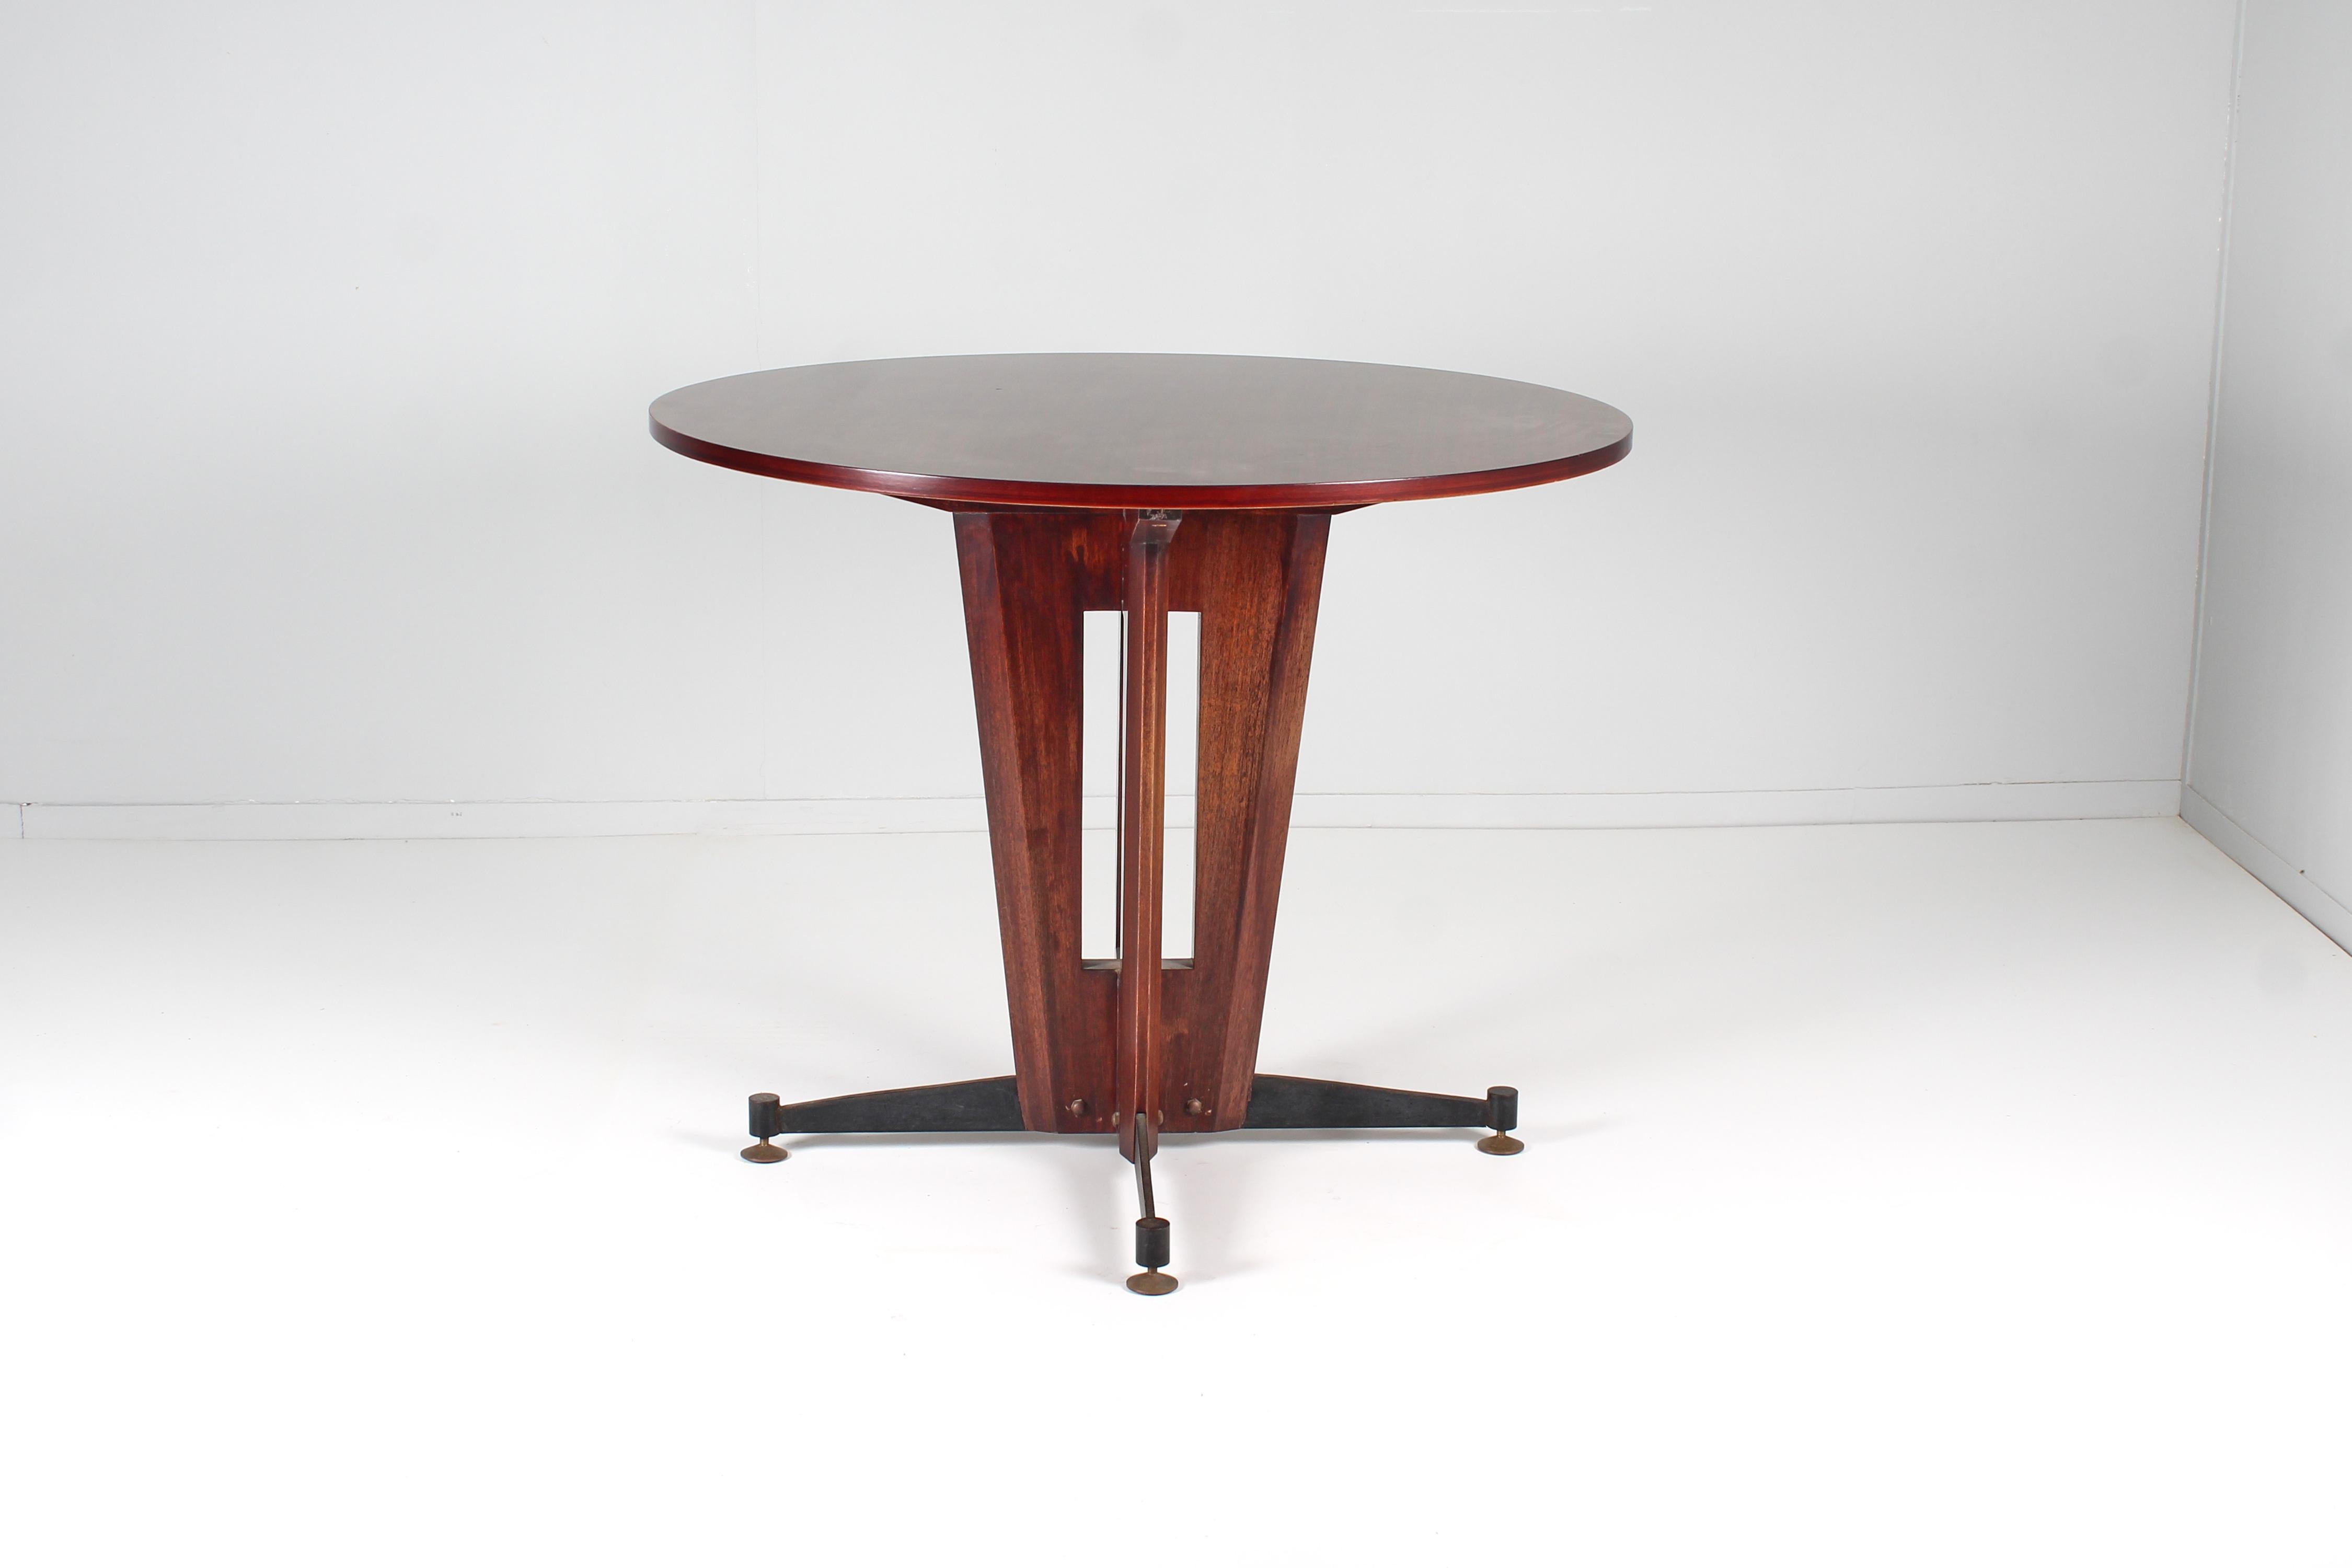 Italian Mid-Century Wooden and Metal Round Dining Table, Cantù, Italy 60s For Sale